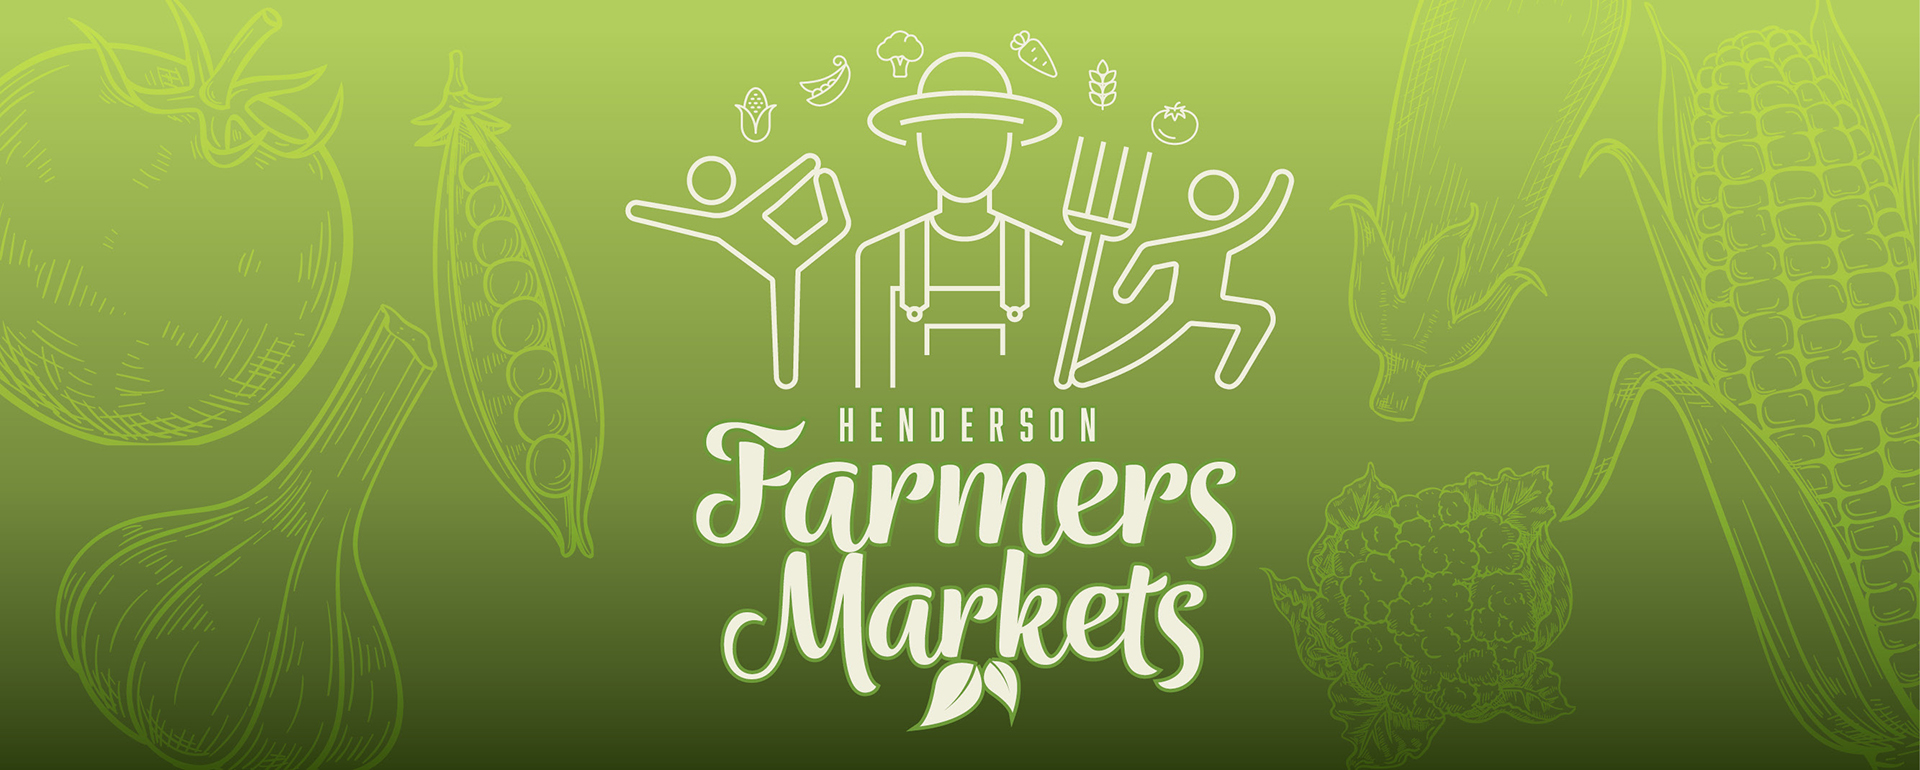 2022 Spring and Summer Henderson Farmers Markets Webpage Banner_1920x770